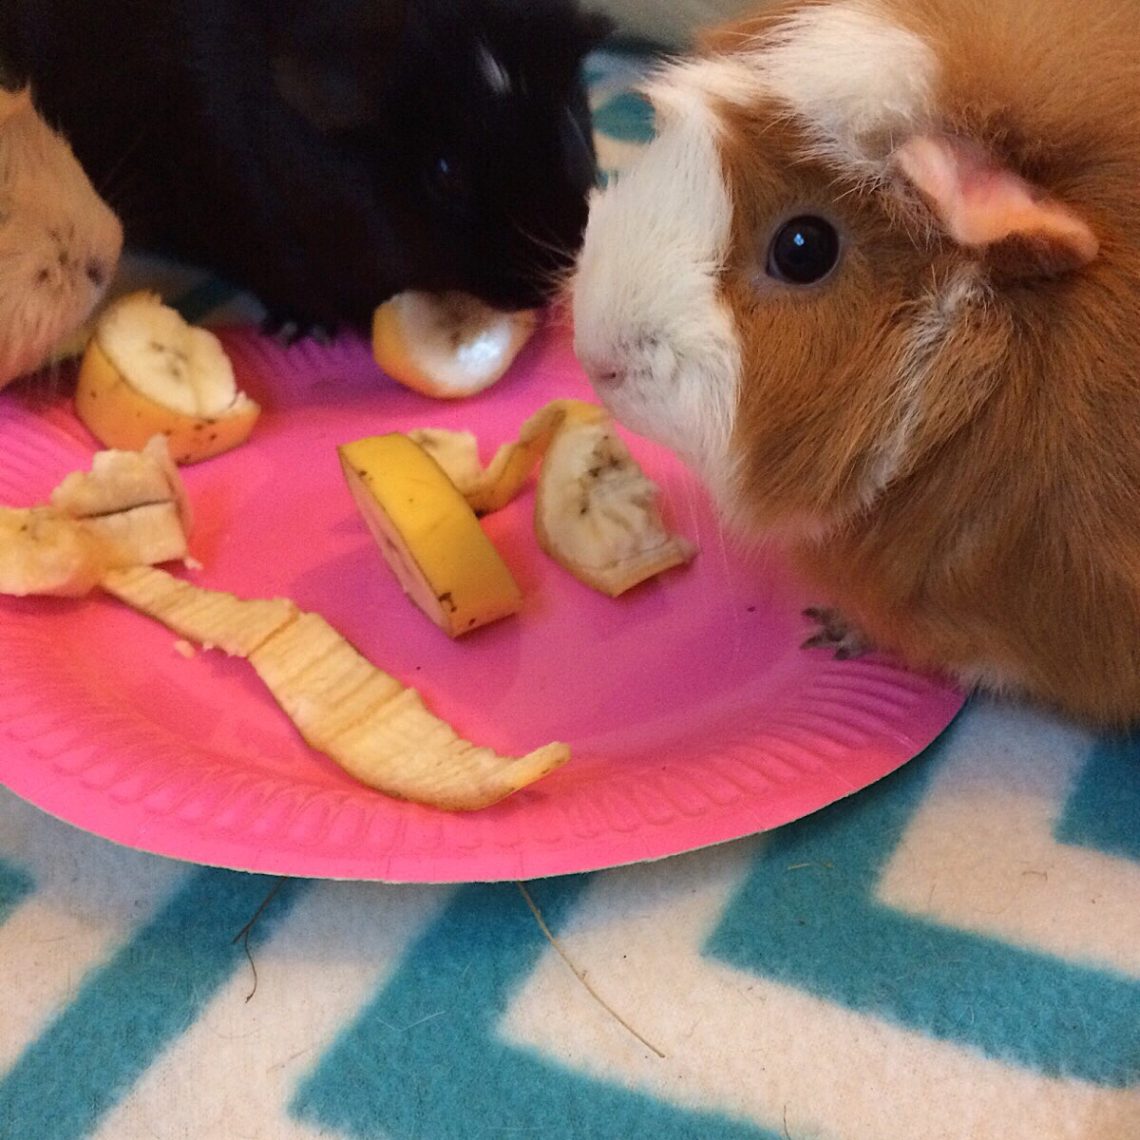 Is it possible to give guinea pigs a banana and its peel